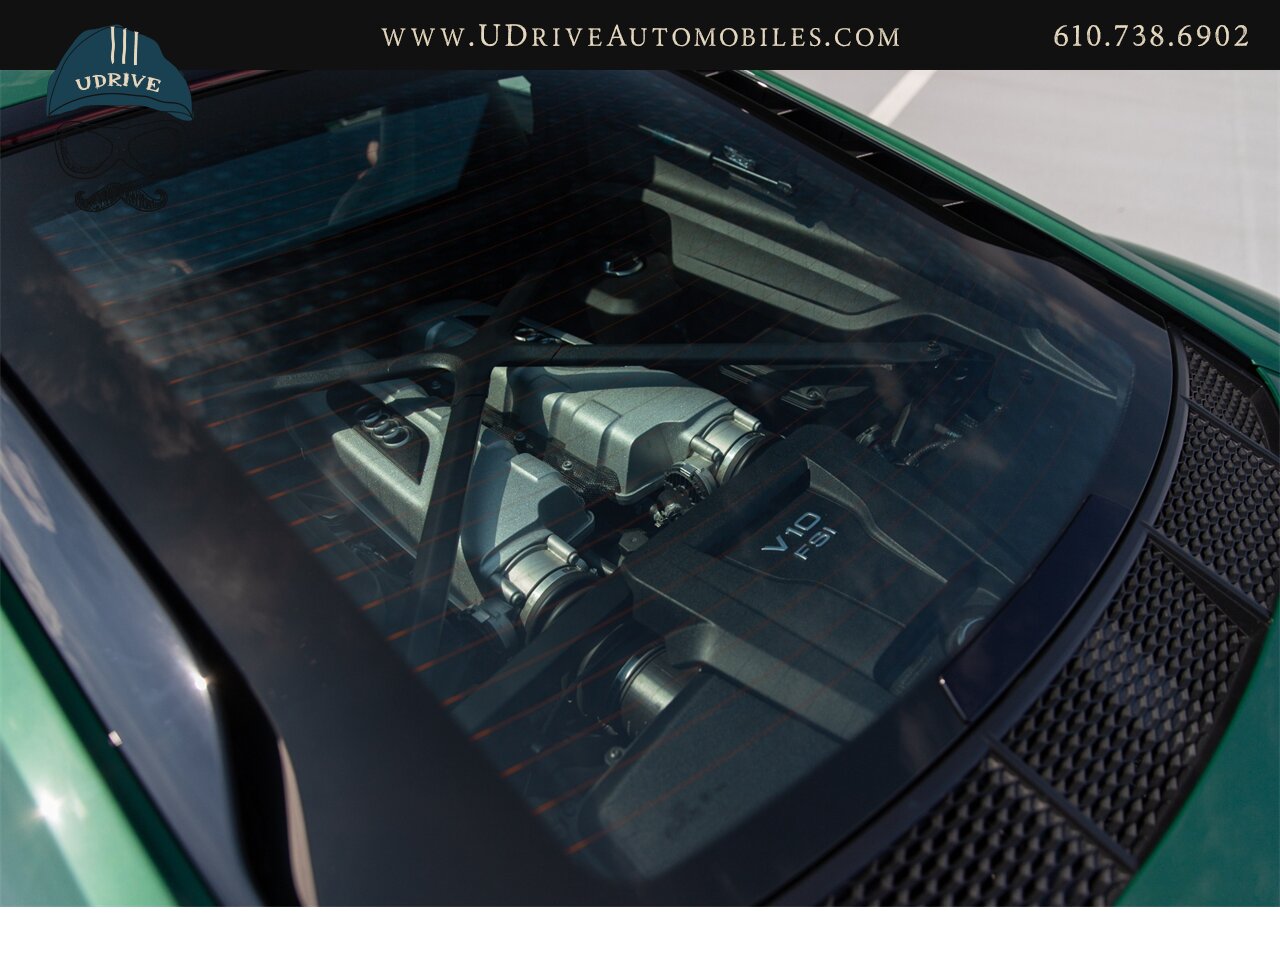 2017 Audi R8 Audi Exclusive Avocado Green Vermont Brown Leather  Diamond Stitching V10 Carbon Fiber - Photo 27 - West Chester, PA 19382